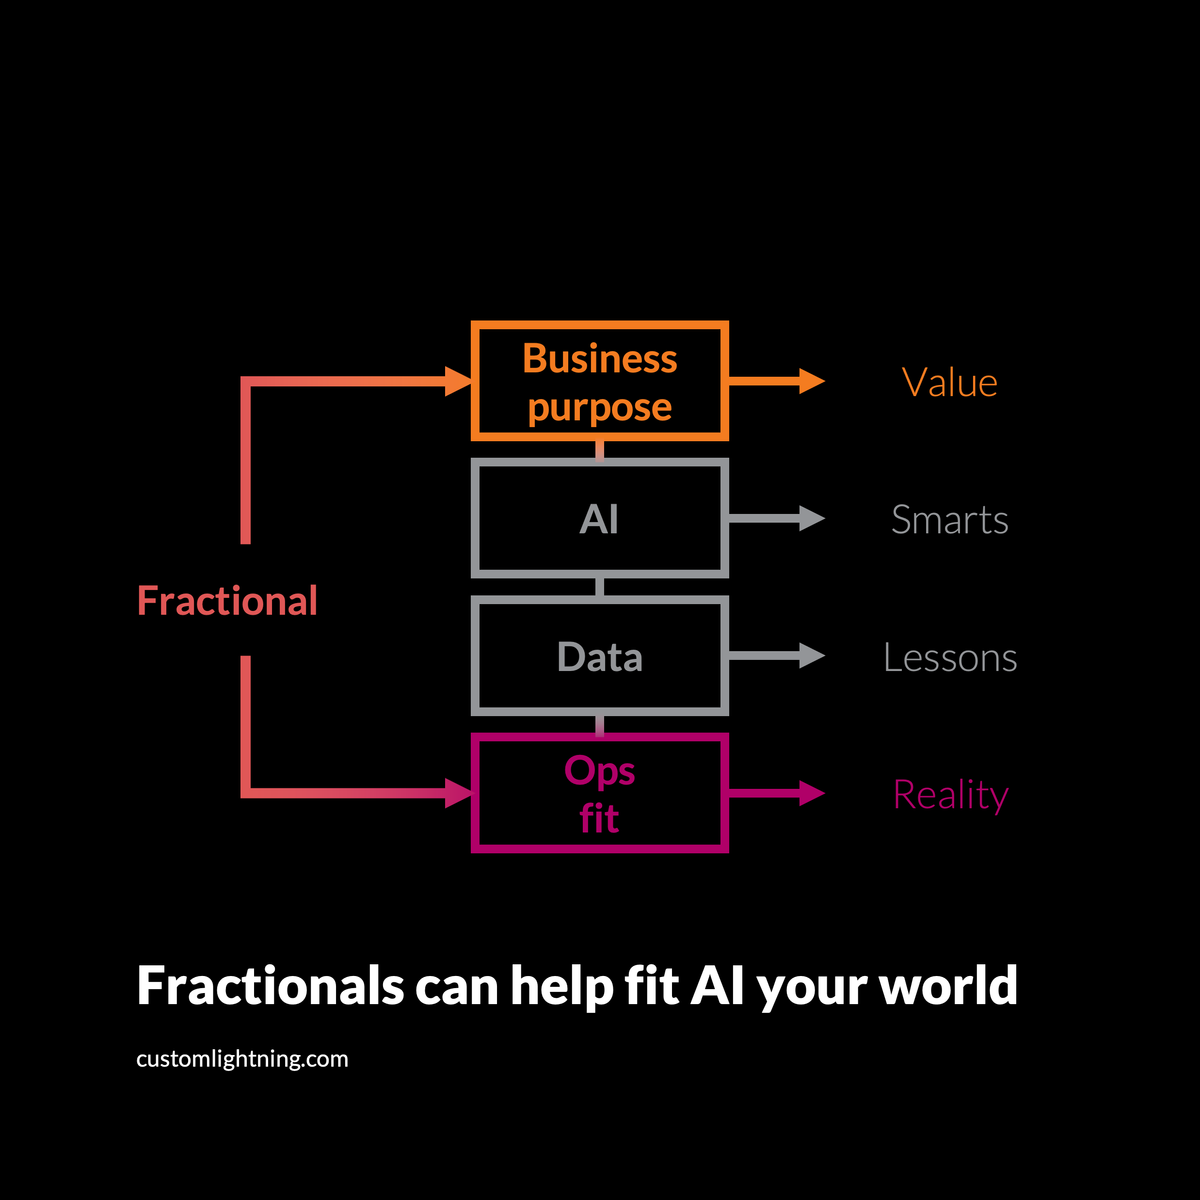 [Blog] Fractional leaders offer credible expertise for a changing world